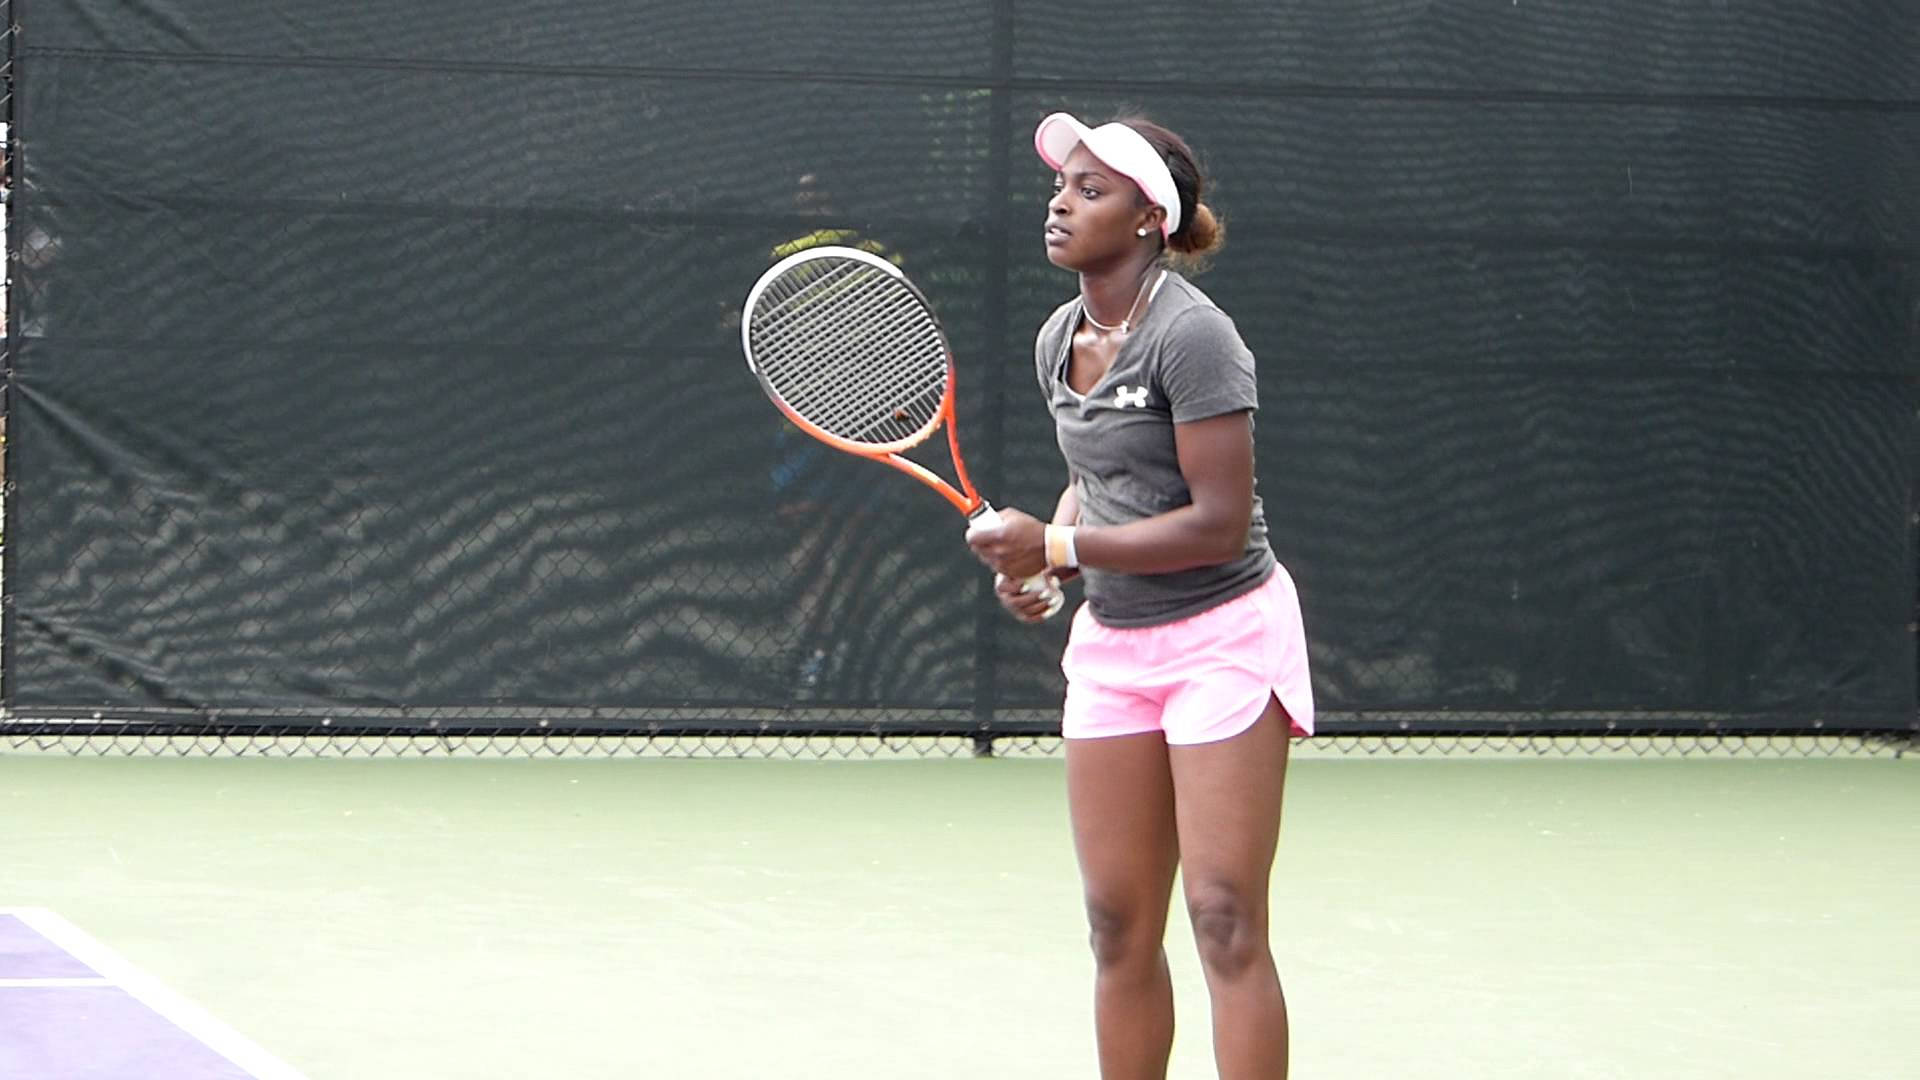 Sloane Stephens - Strength And Passion On The Court